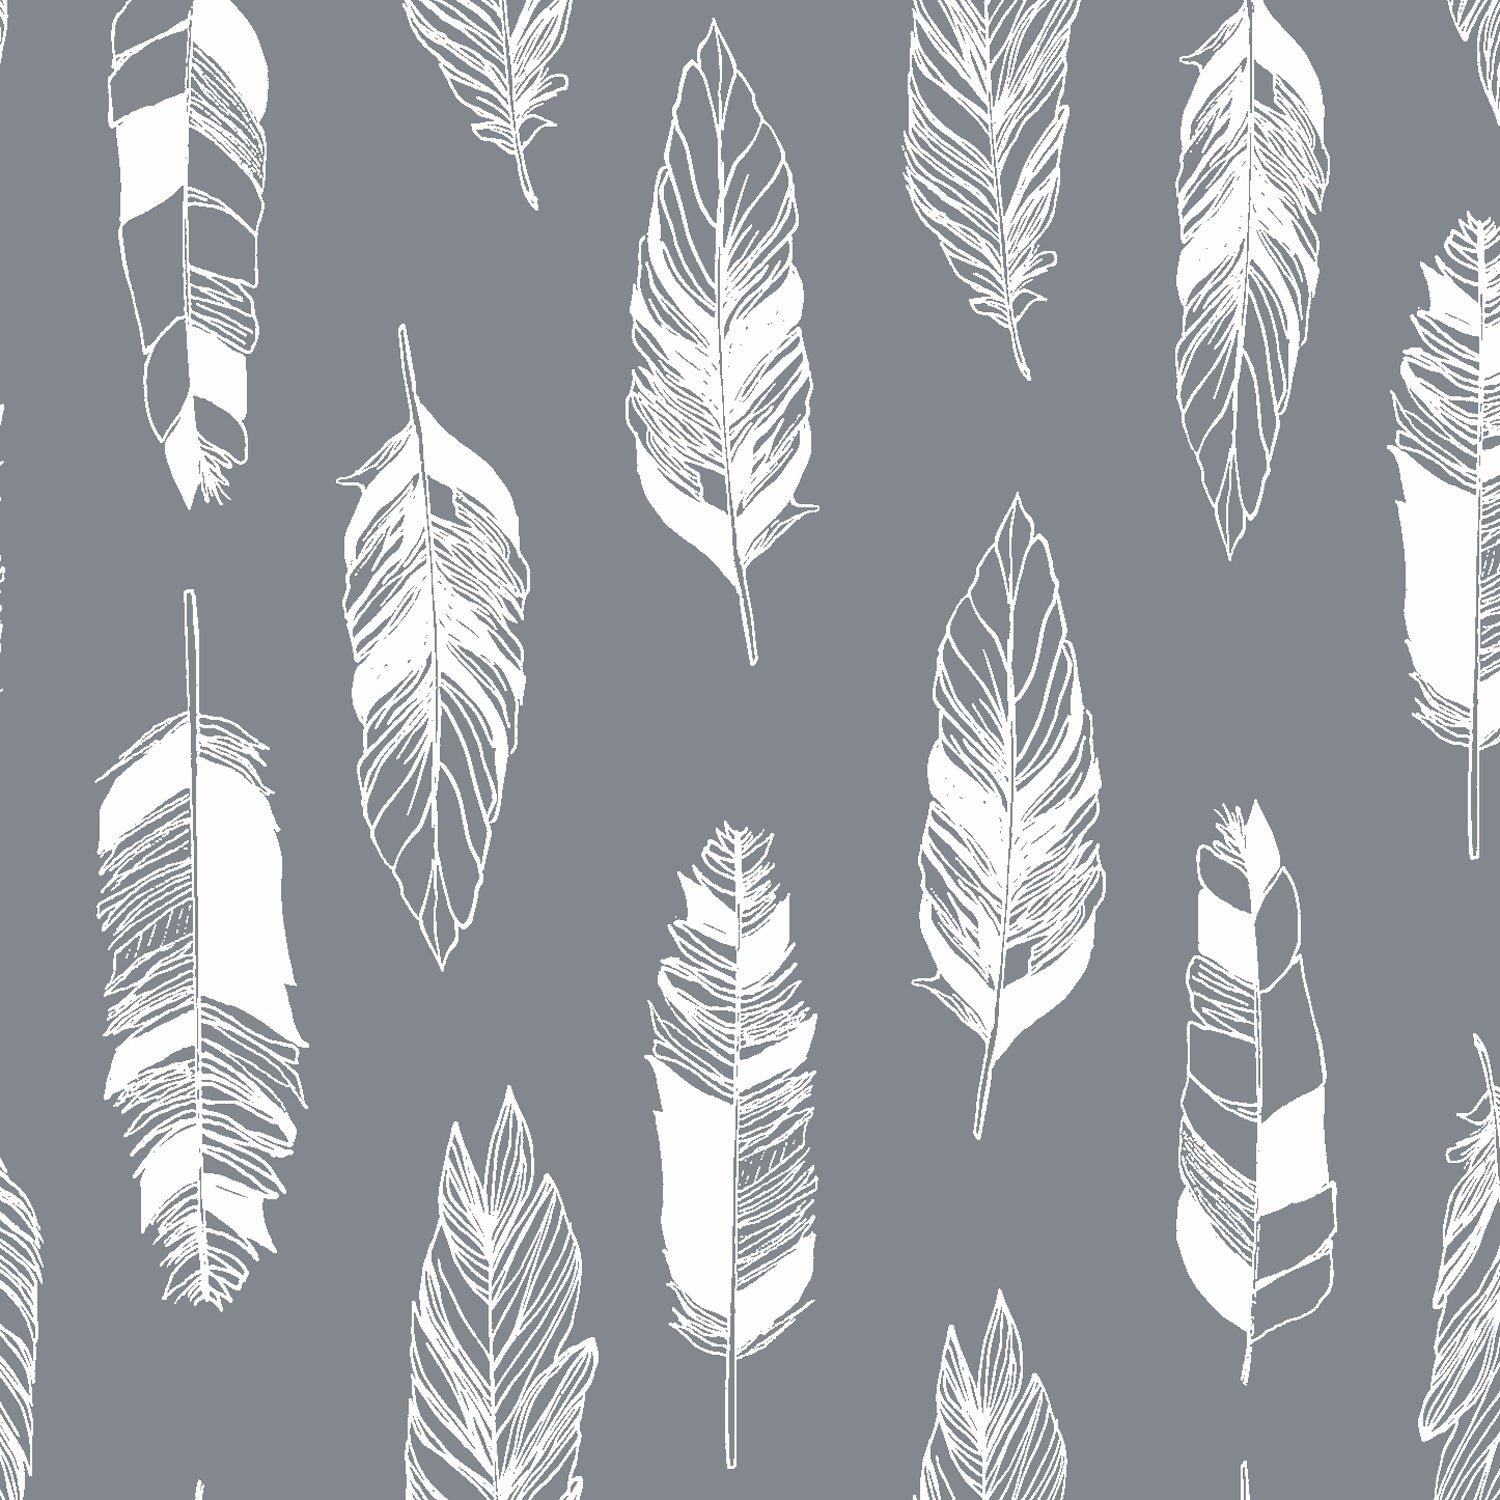 Waverly Inspirations Cotton 44" Feather Steel Color Sewing Fabric by the Yard